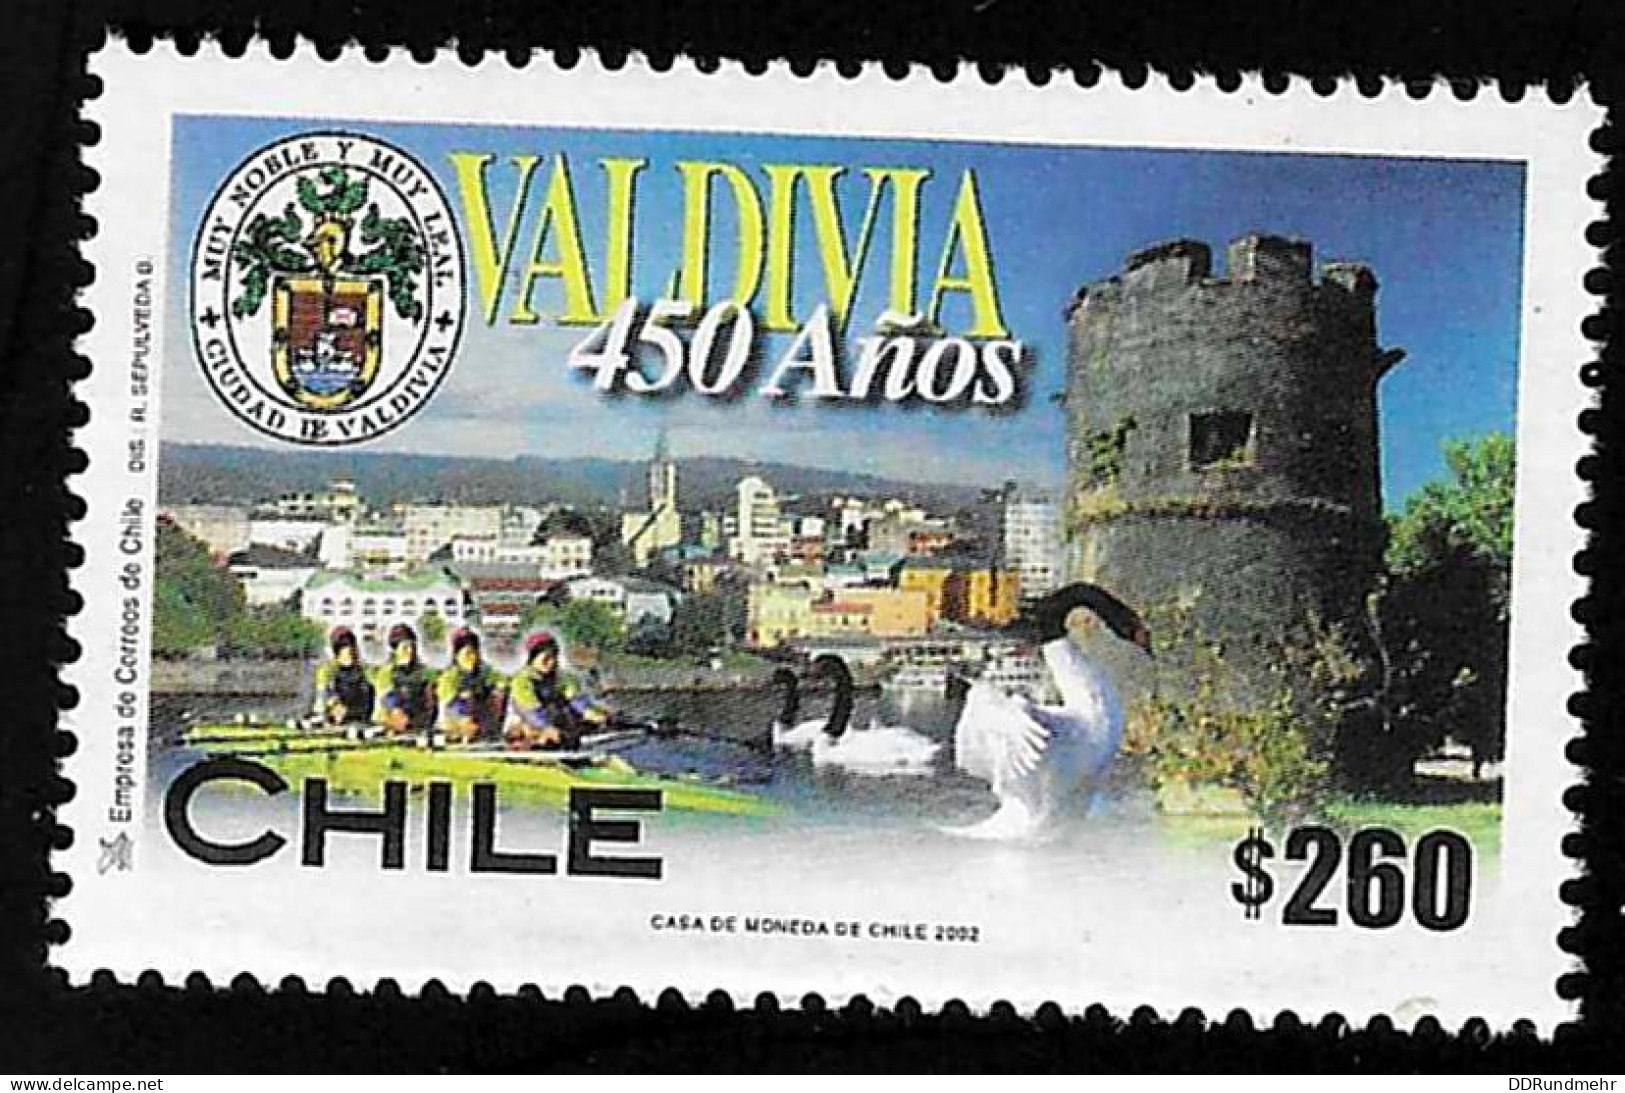 2002 Valdivia  Michel CL 2062 Stamp Number CL 1387 Yvert Et Tellier CL 1627 Stanley Gibbons CL 2039 Xx MNH - Chili